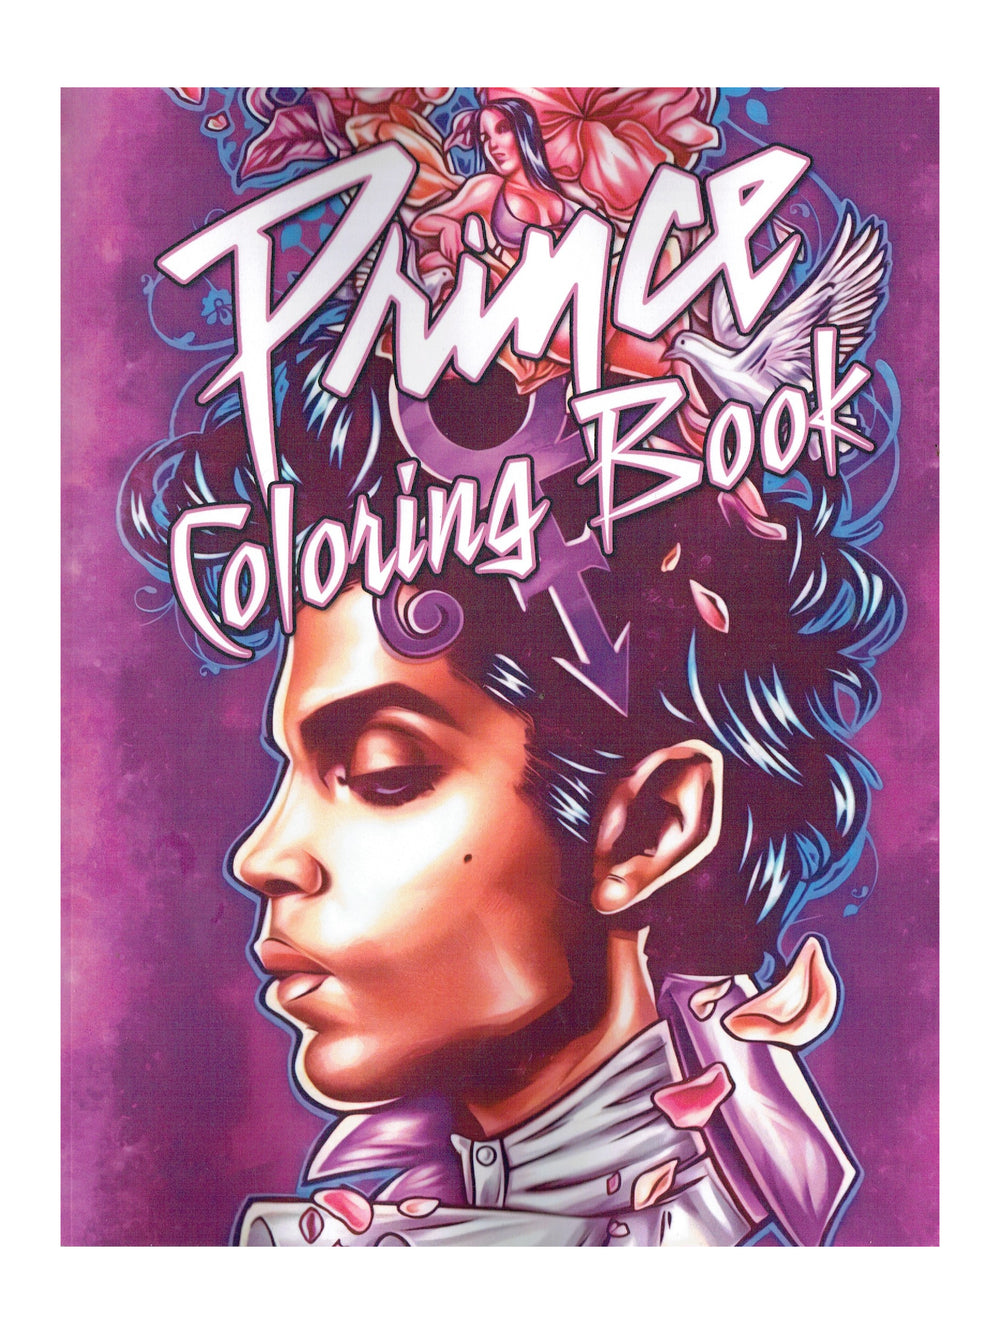 Prince – Colouring Book #2 Softback Brand New 25 Images